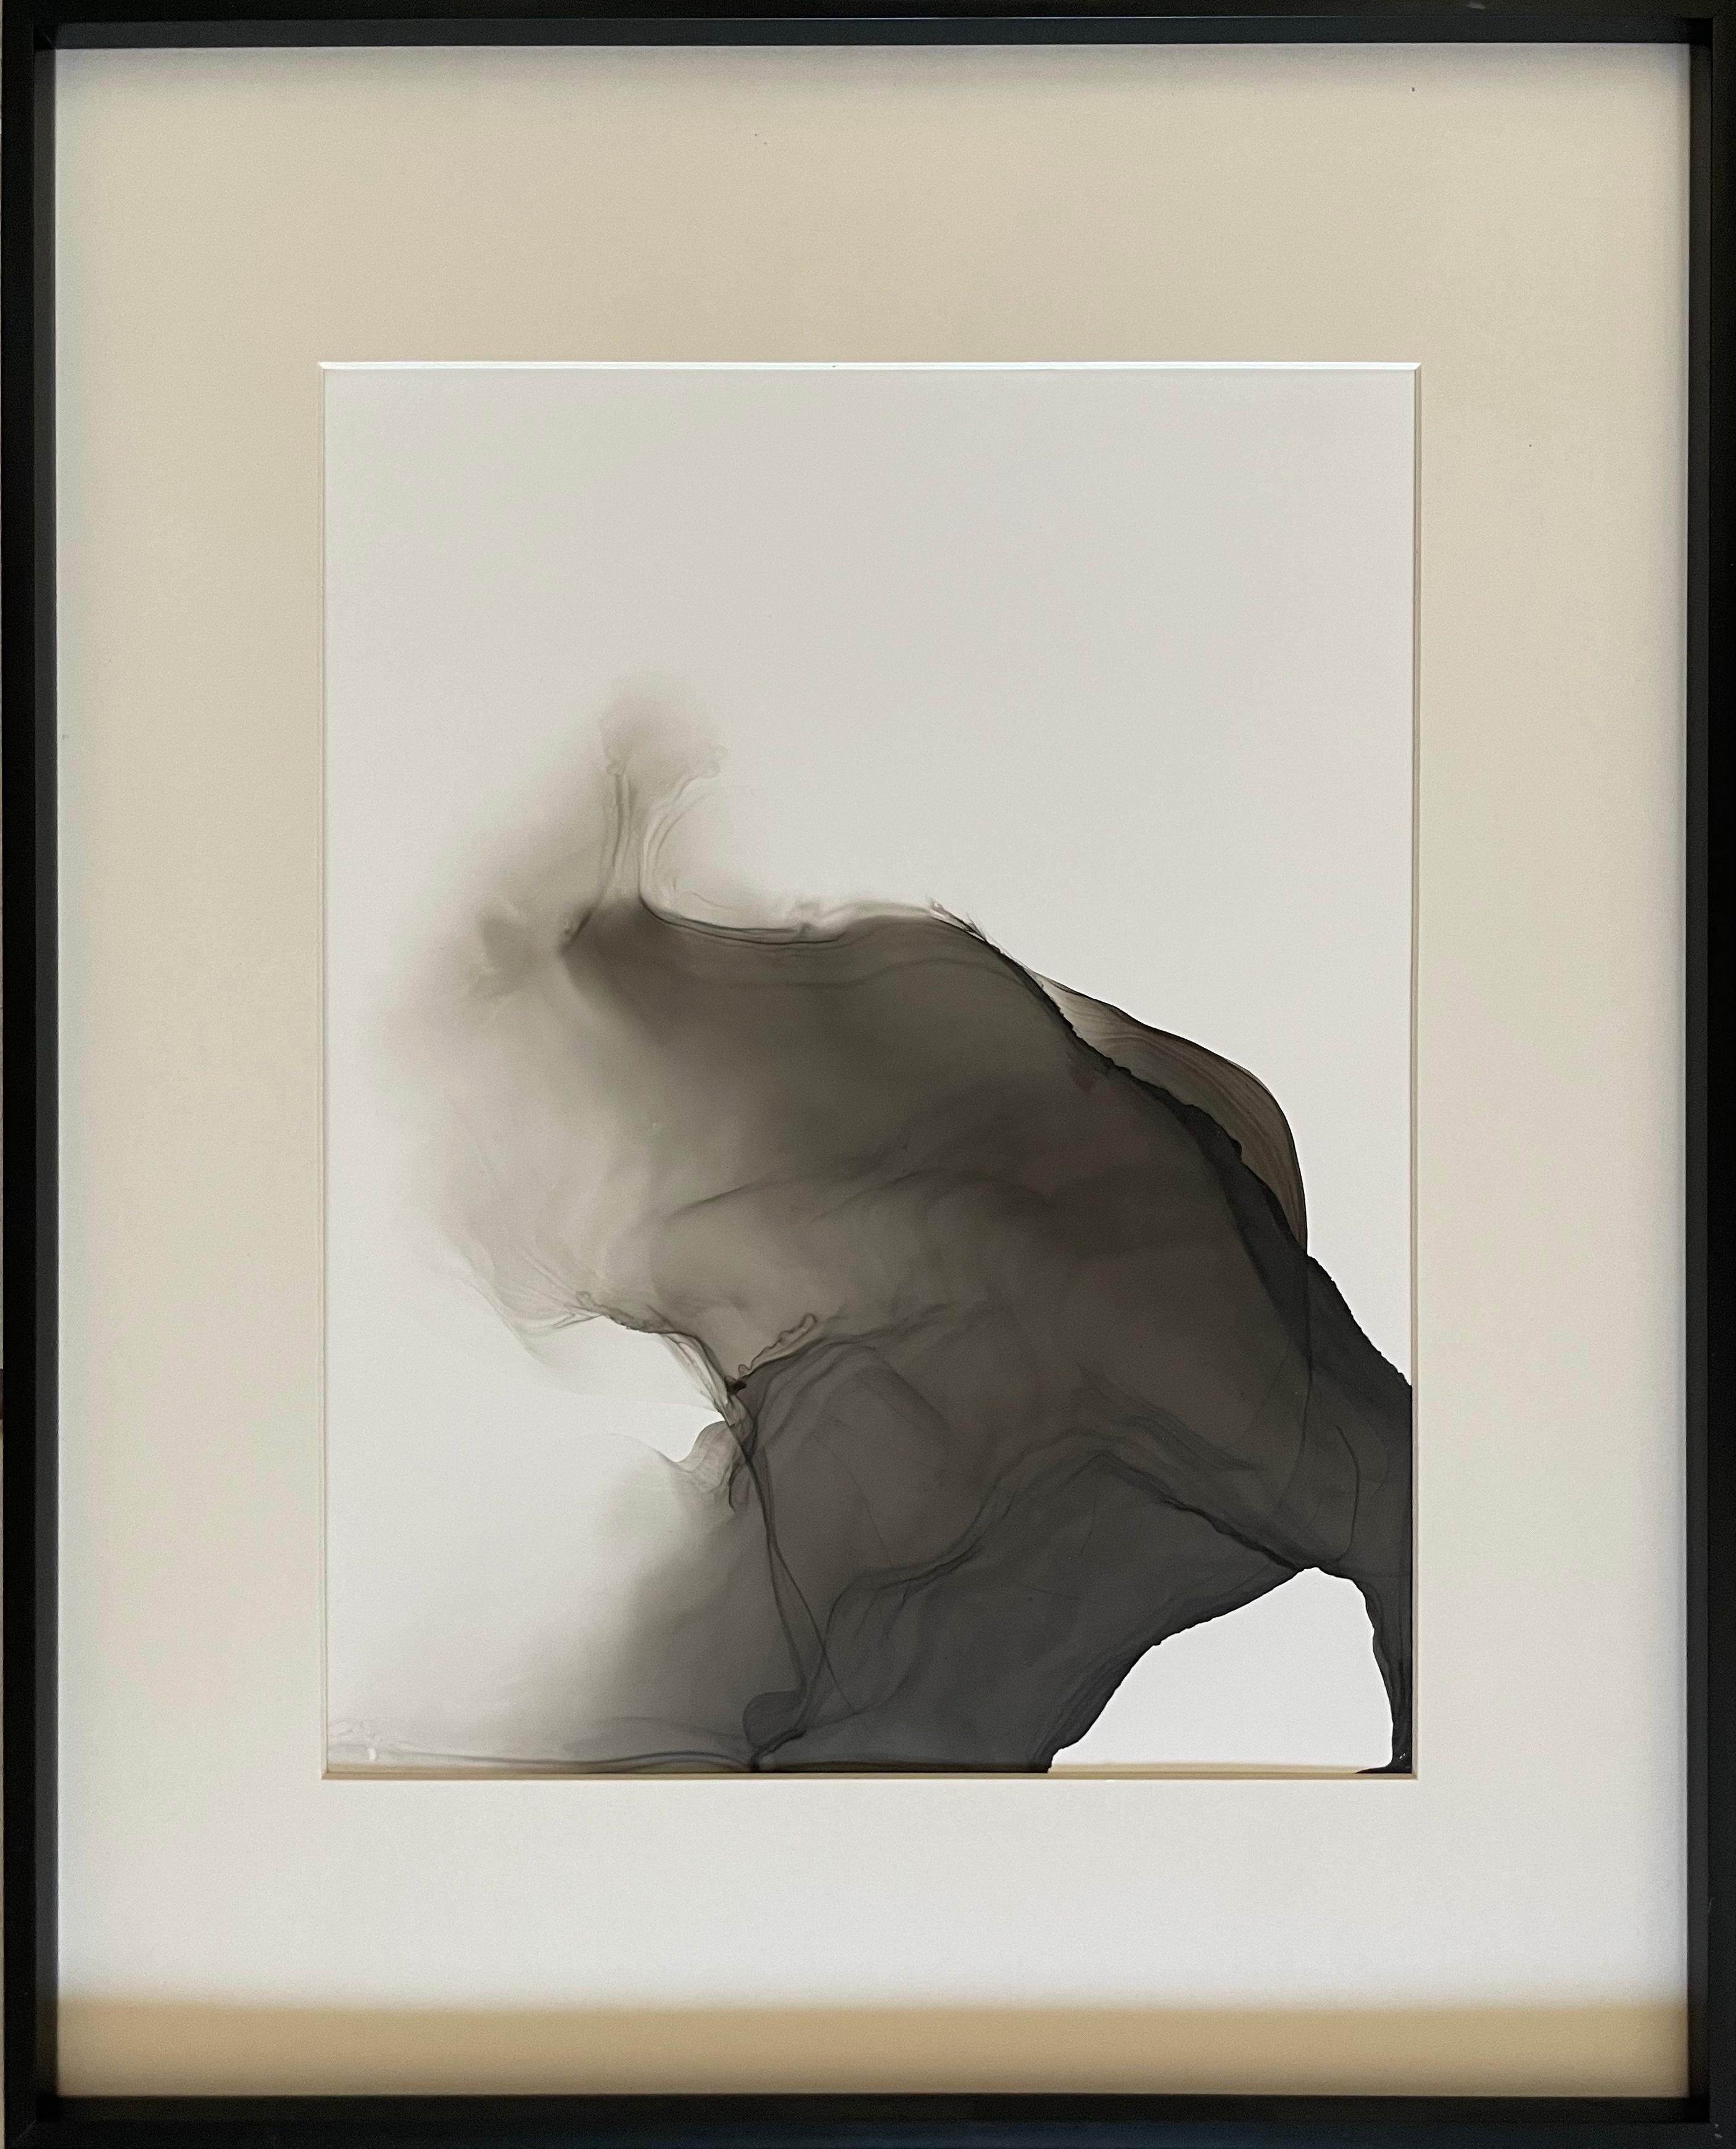 Untitled II - abstract painting, made in black, grey color